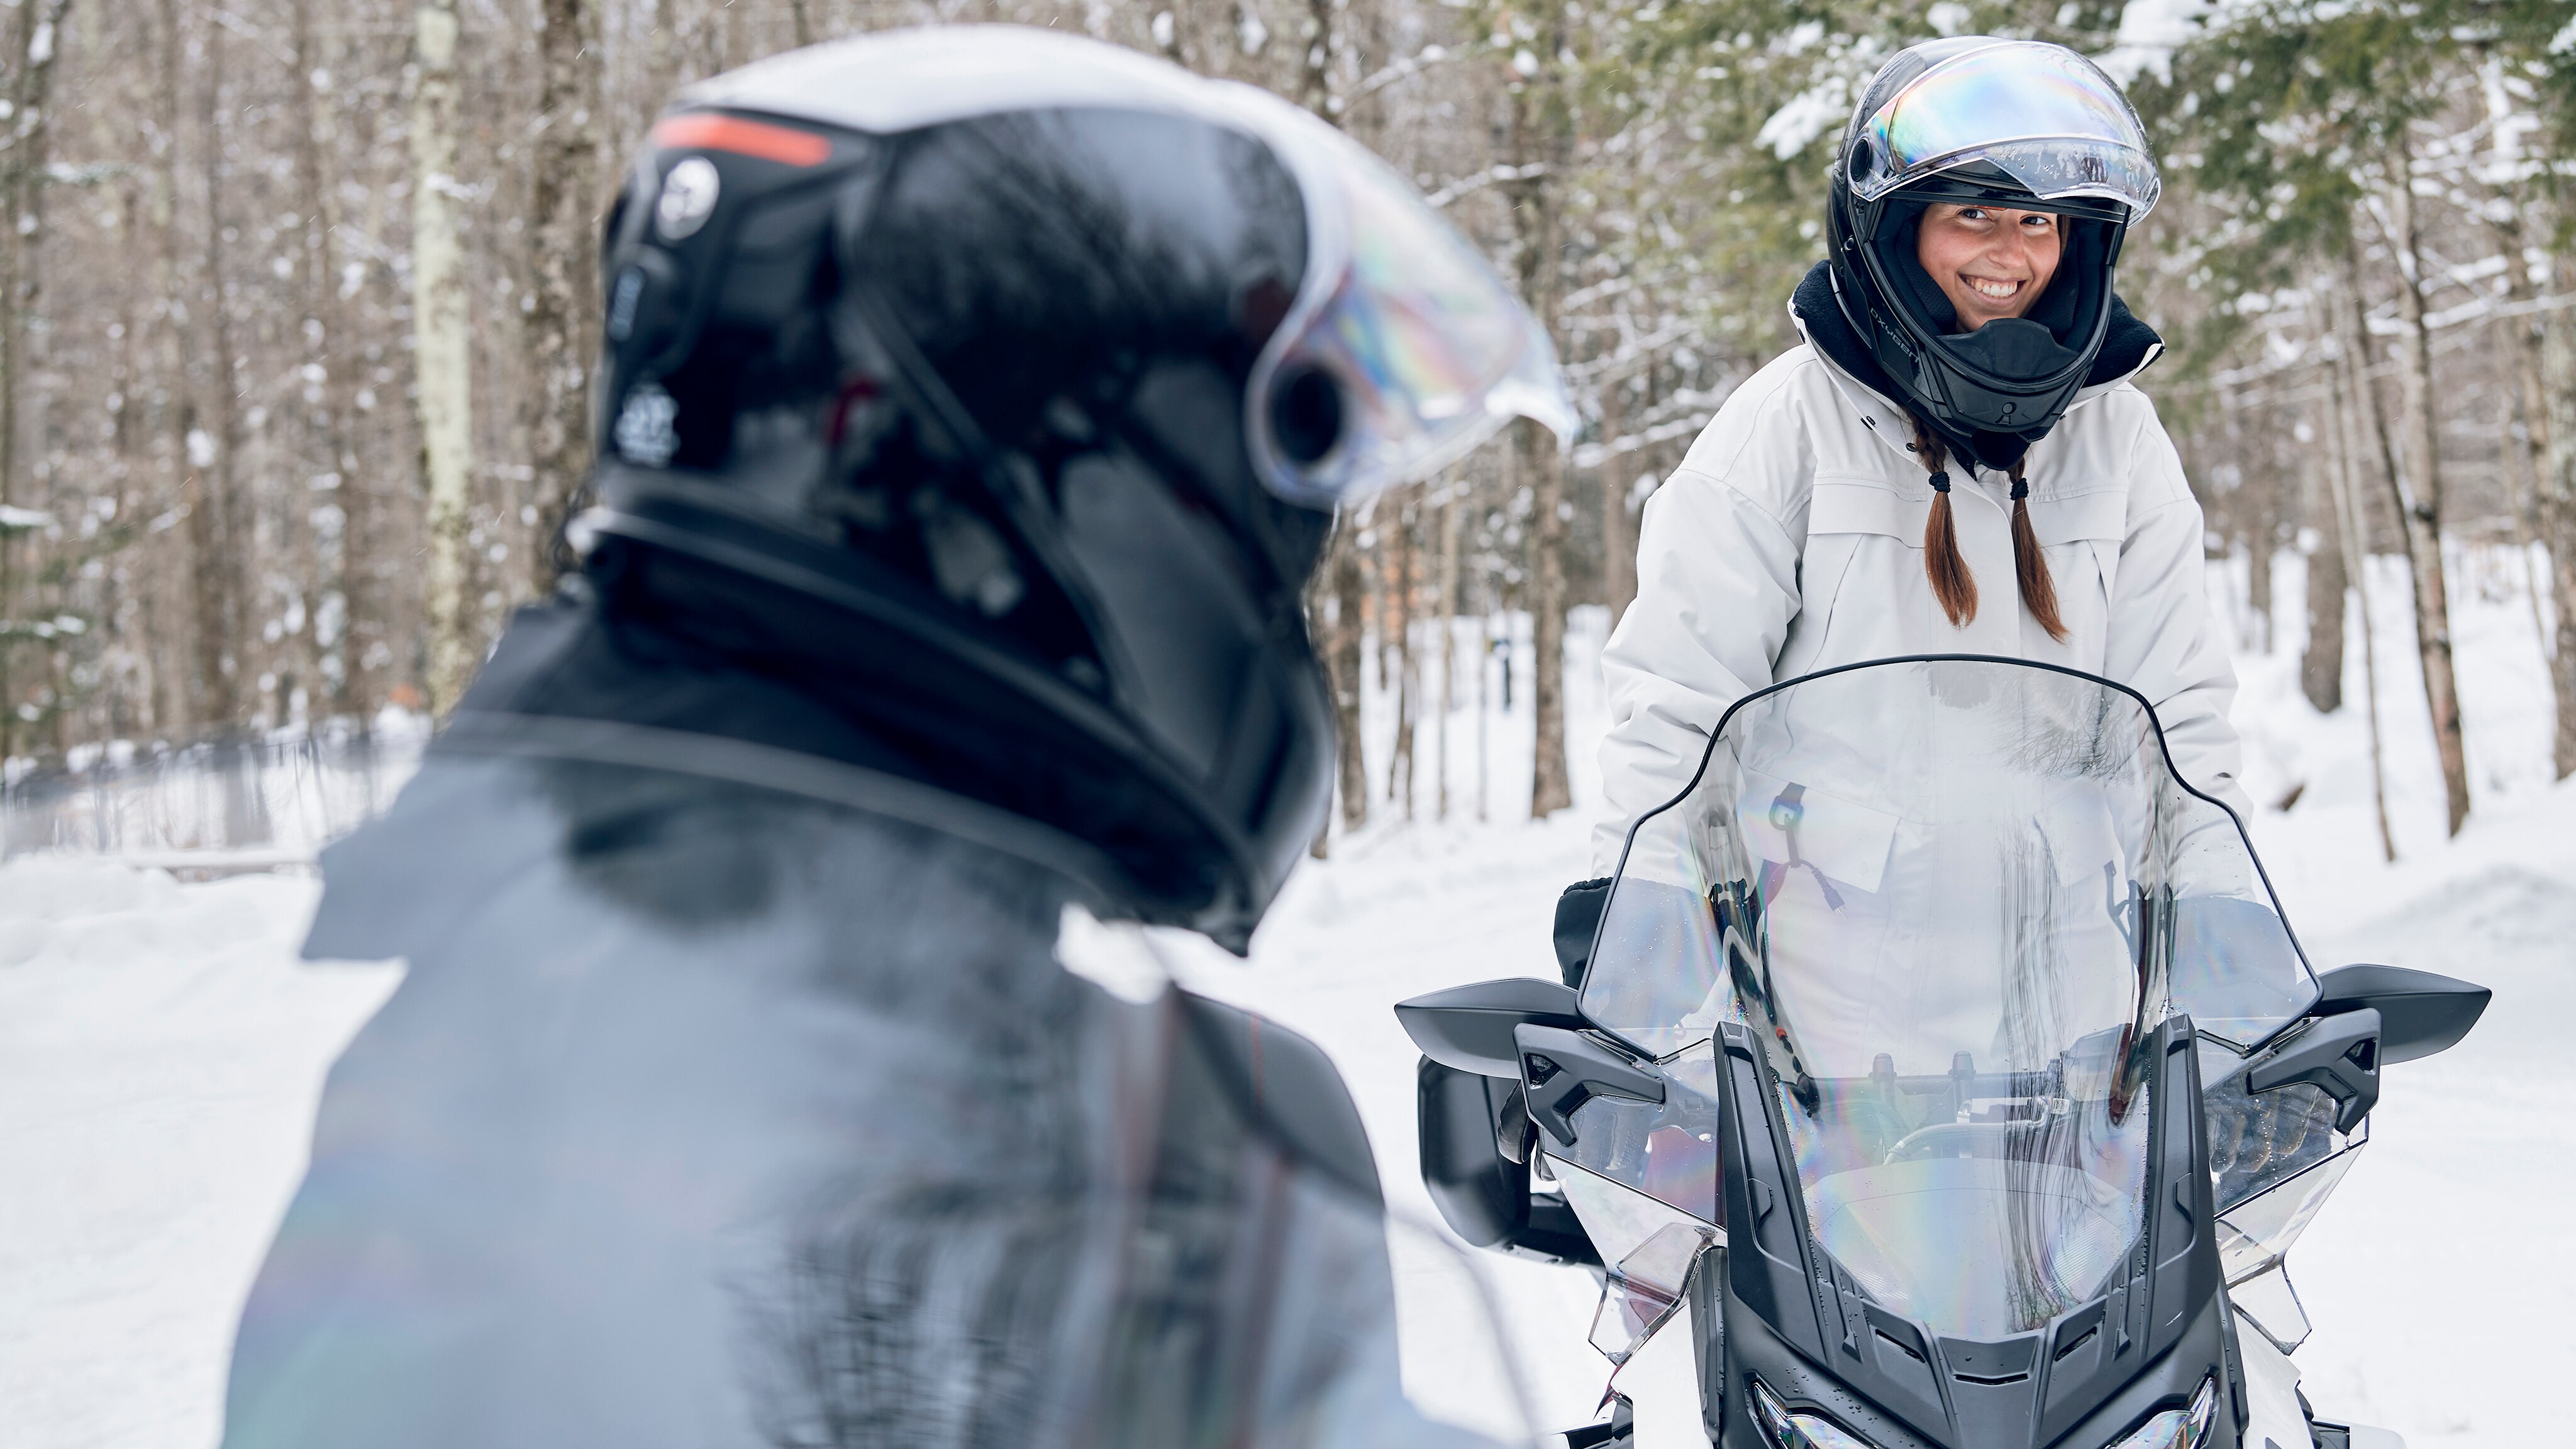 Woman smiling on a ski-doo grand touring electric